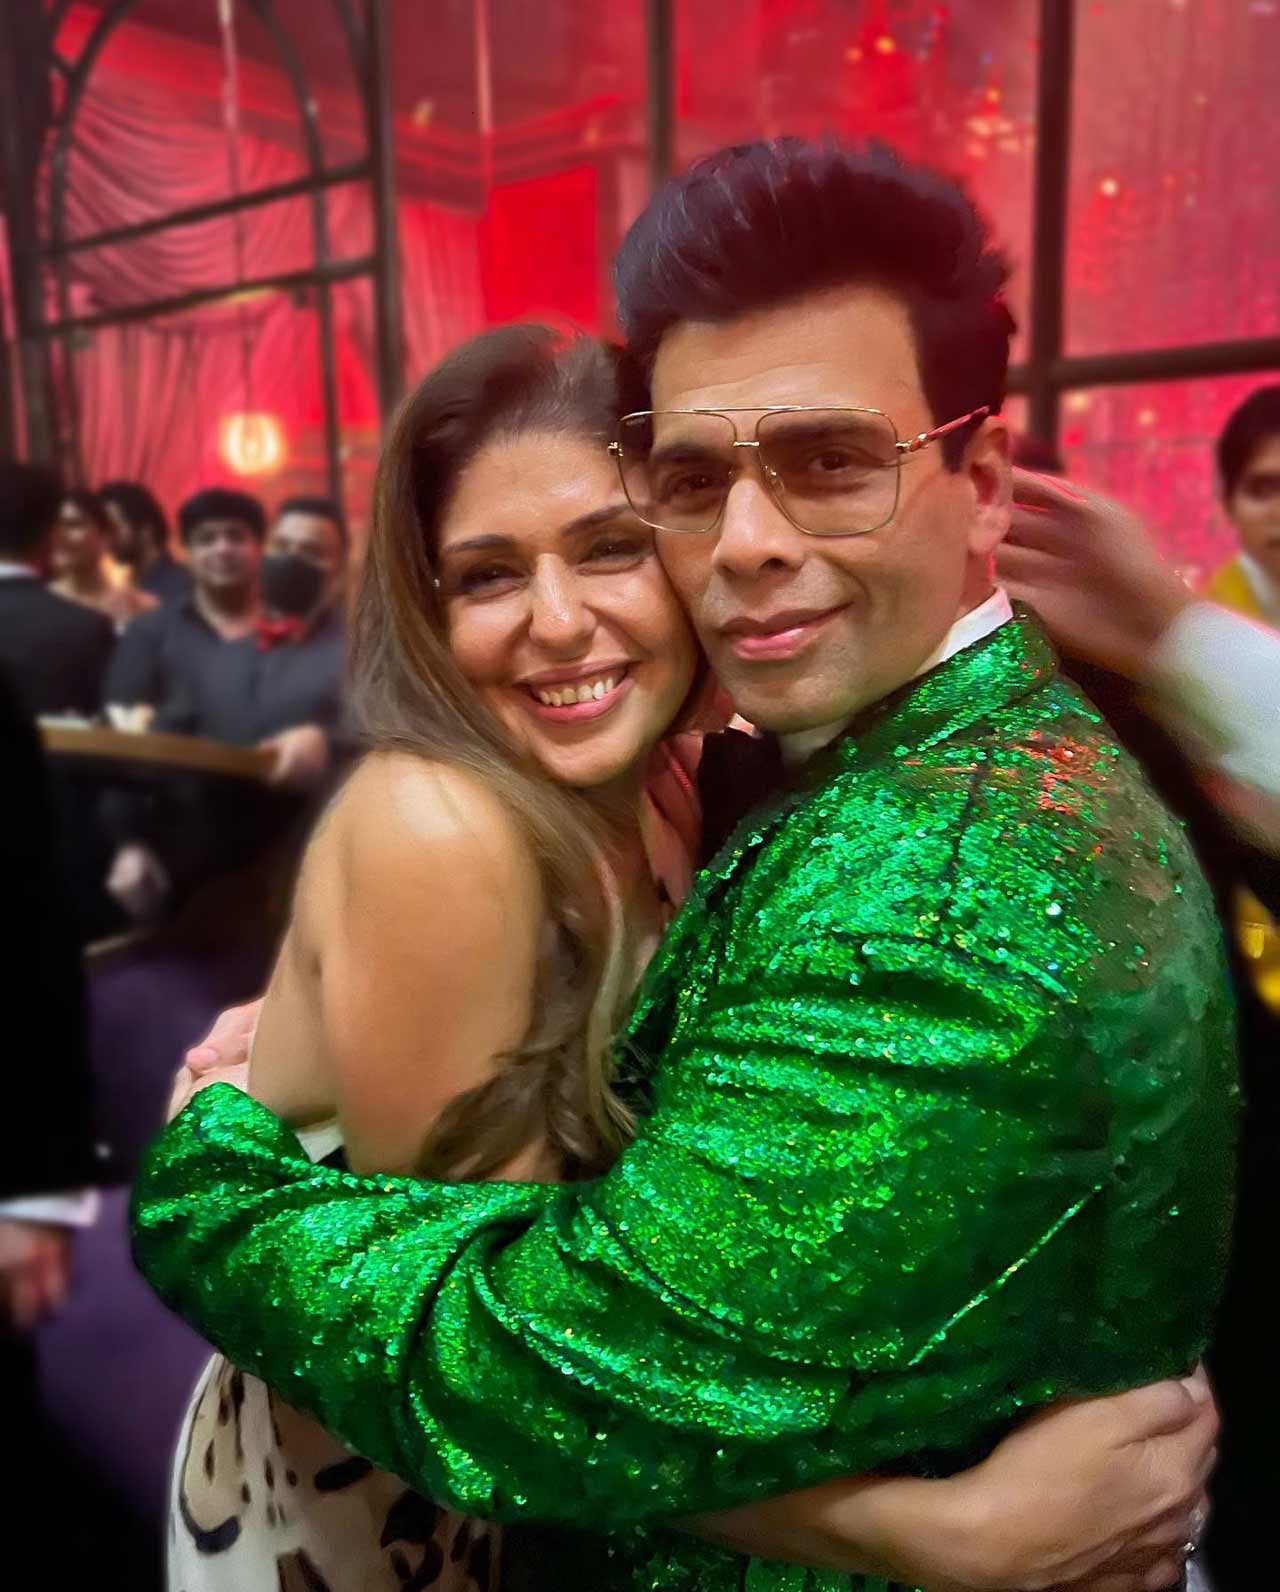 For the celebration, Karan Johar organised a grand birthday bash at his Bandra residence and invited all his close friends. Anaita Shroff Adjania, Raveena Tandon, Preity Zinta, and a lot of celebrities shared some inside photos from the party and the pictures have taken over the internet.